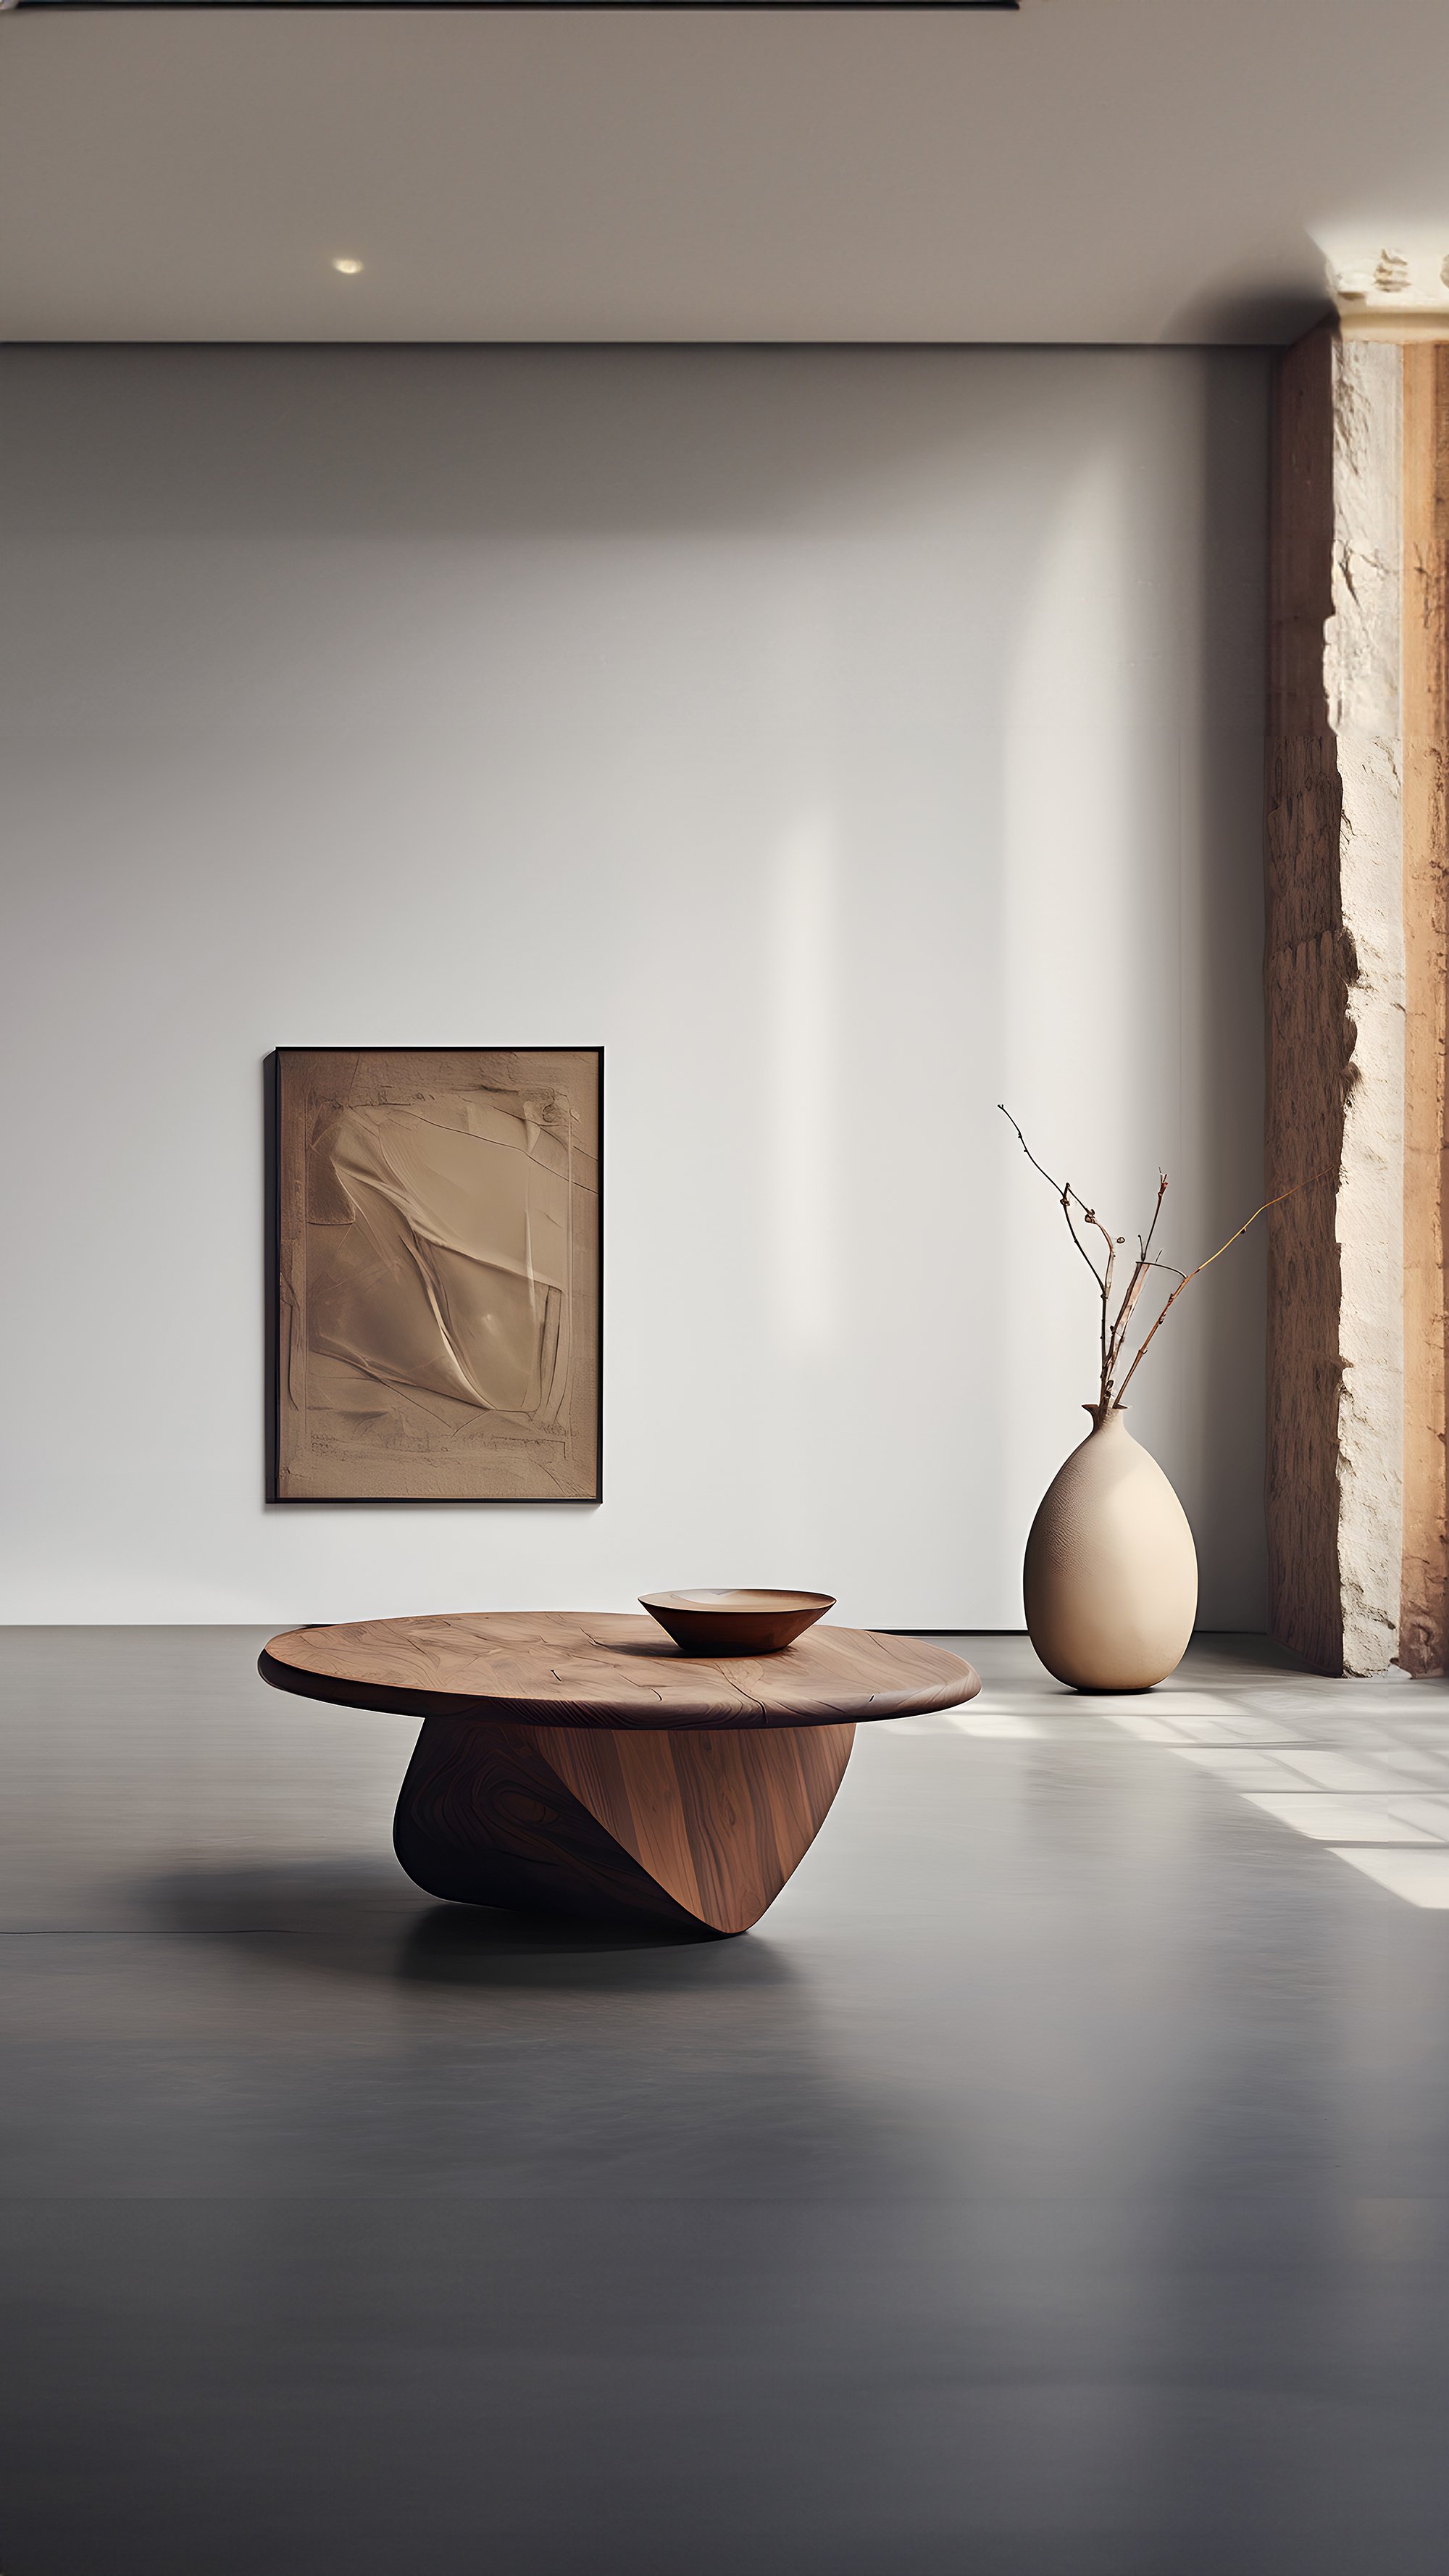 Sculptural Coffee Table Made of Solid Wood, Center Table Solace S38 by Joel Escalona — 9.jpg